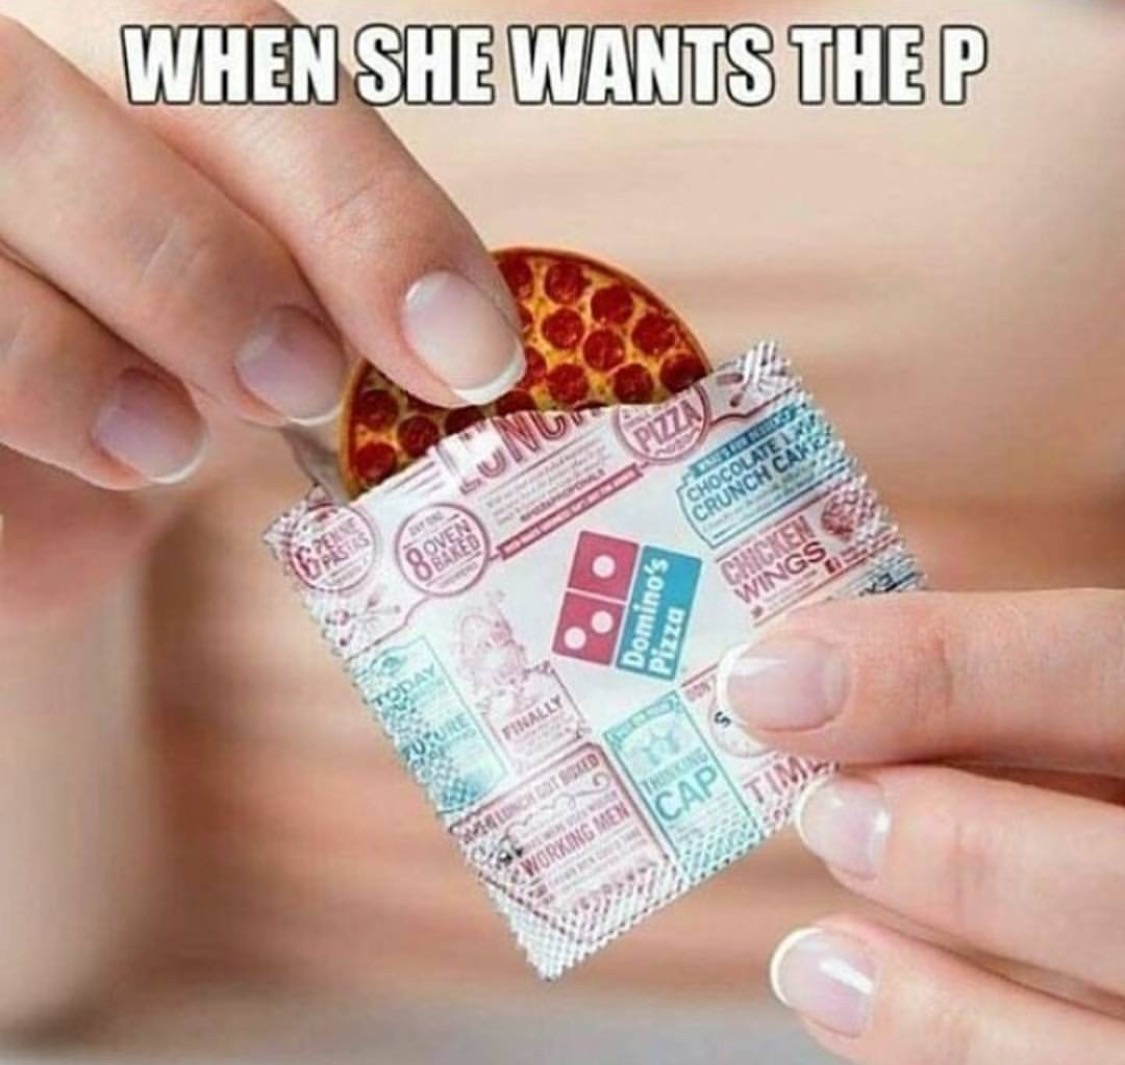 pizza memes - When She Wants The P Ocolate Cruncher Domino's Pizza